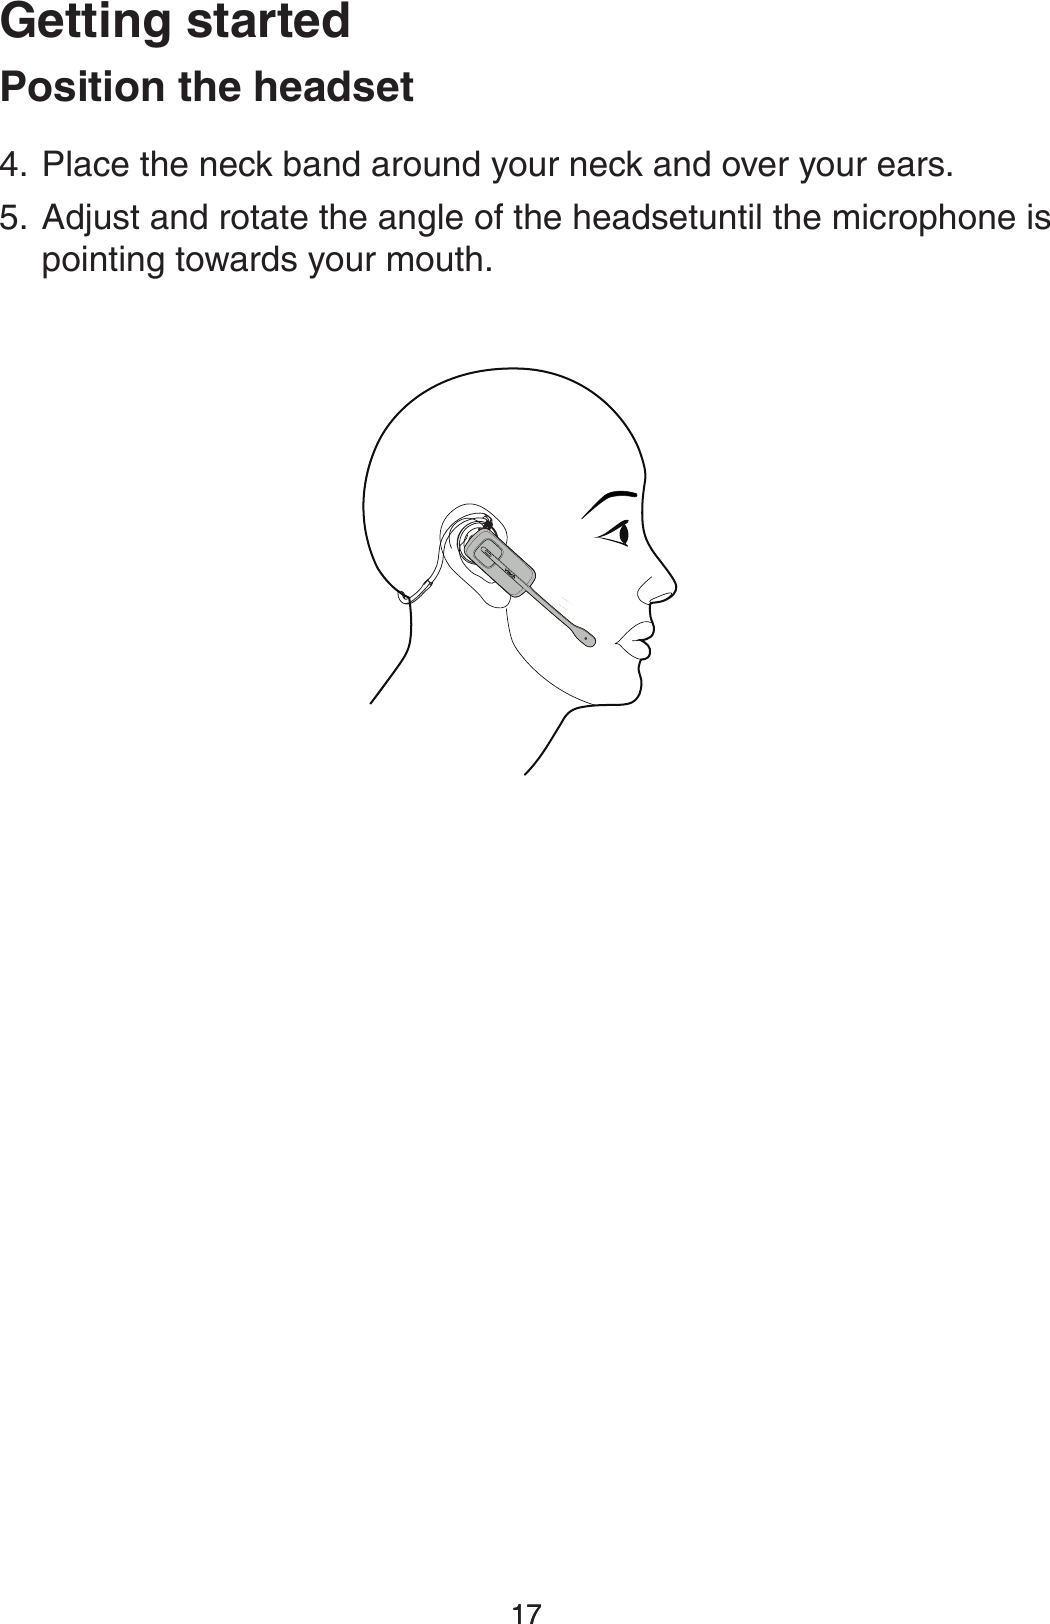 1717(FUUJOHTUBSUFE1PTJUJPOUIFIFBETFUPlace the neck band around your neck and over your ears.Adjust and rotate the angle of the headsetuntil the microphone is pointing towards your mouth.4.5.